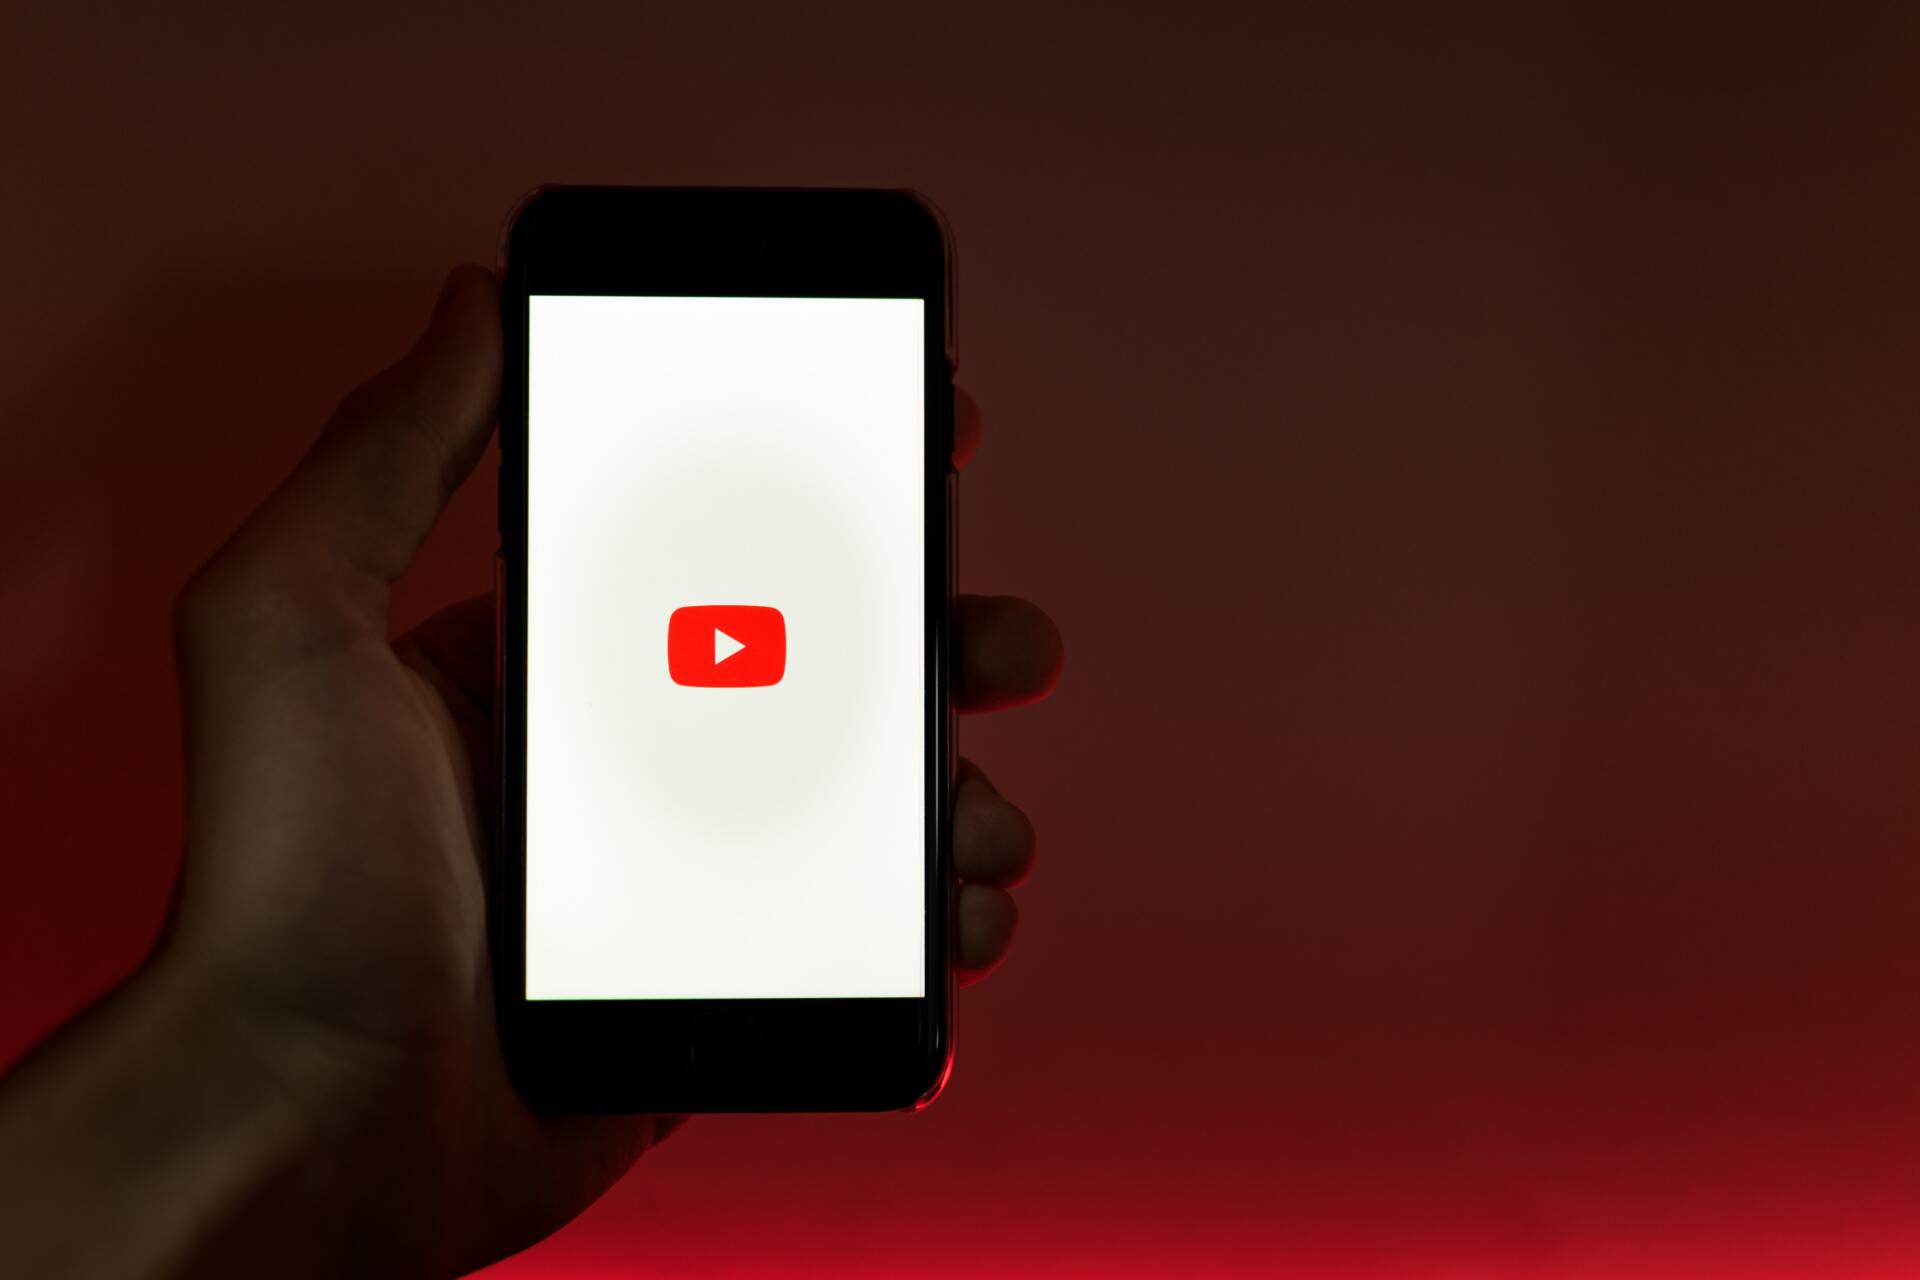 Hand holding phone in front of red background with youtube icon on phone screen